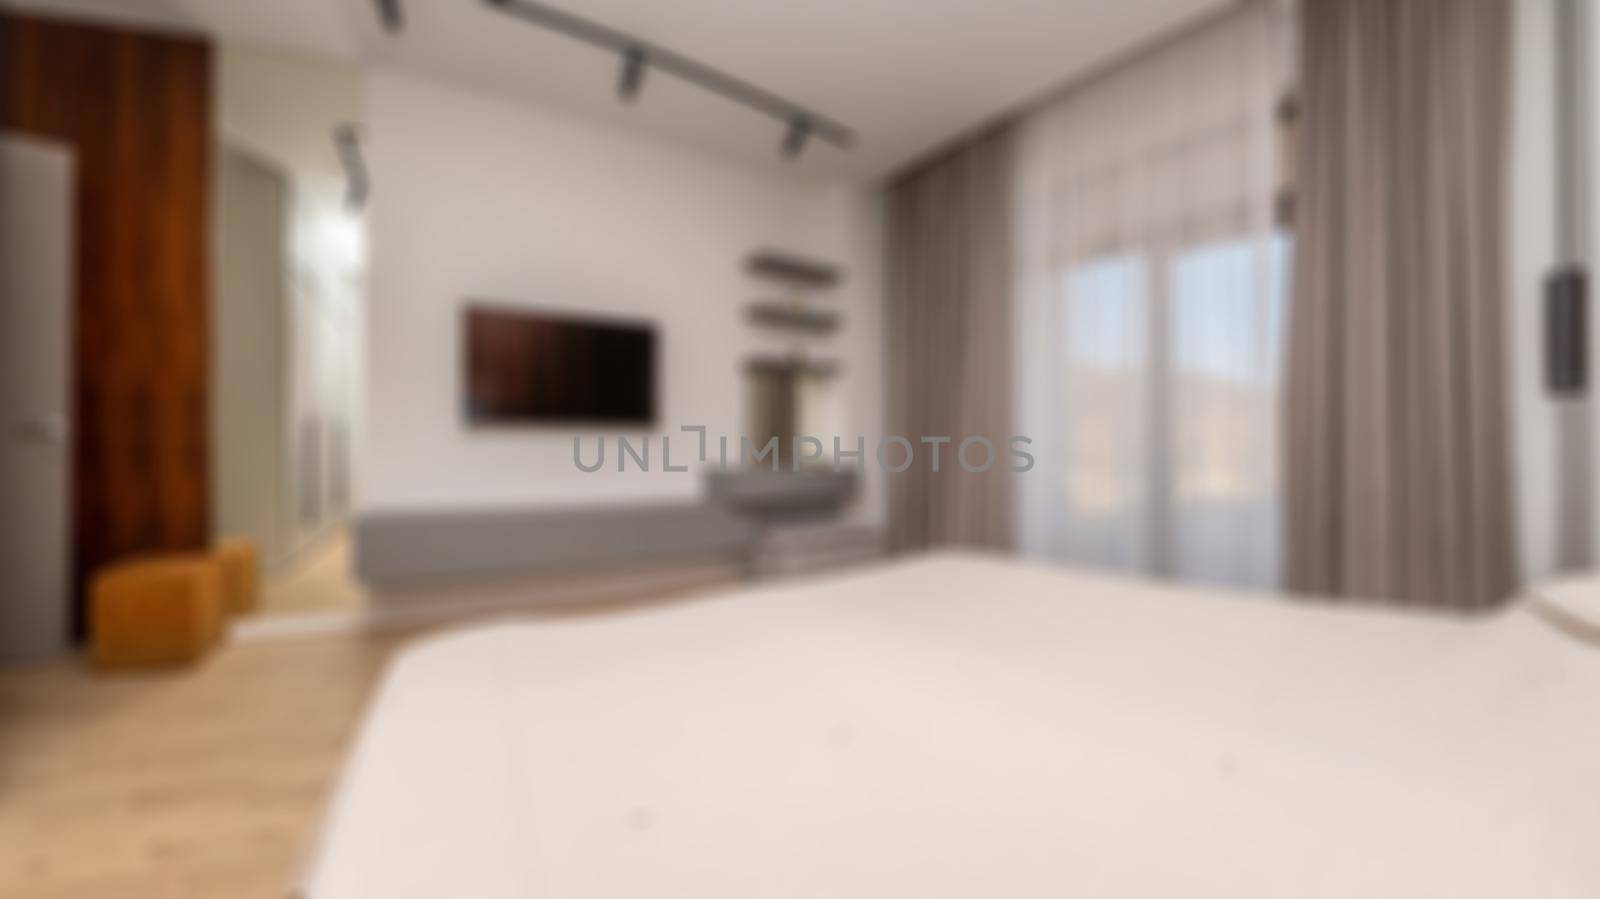 abstract blur hotel bedroom interior for background Abstract blur and defocused of long building hallway, apartment, condominium, hotel, commercial office building.